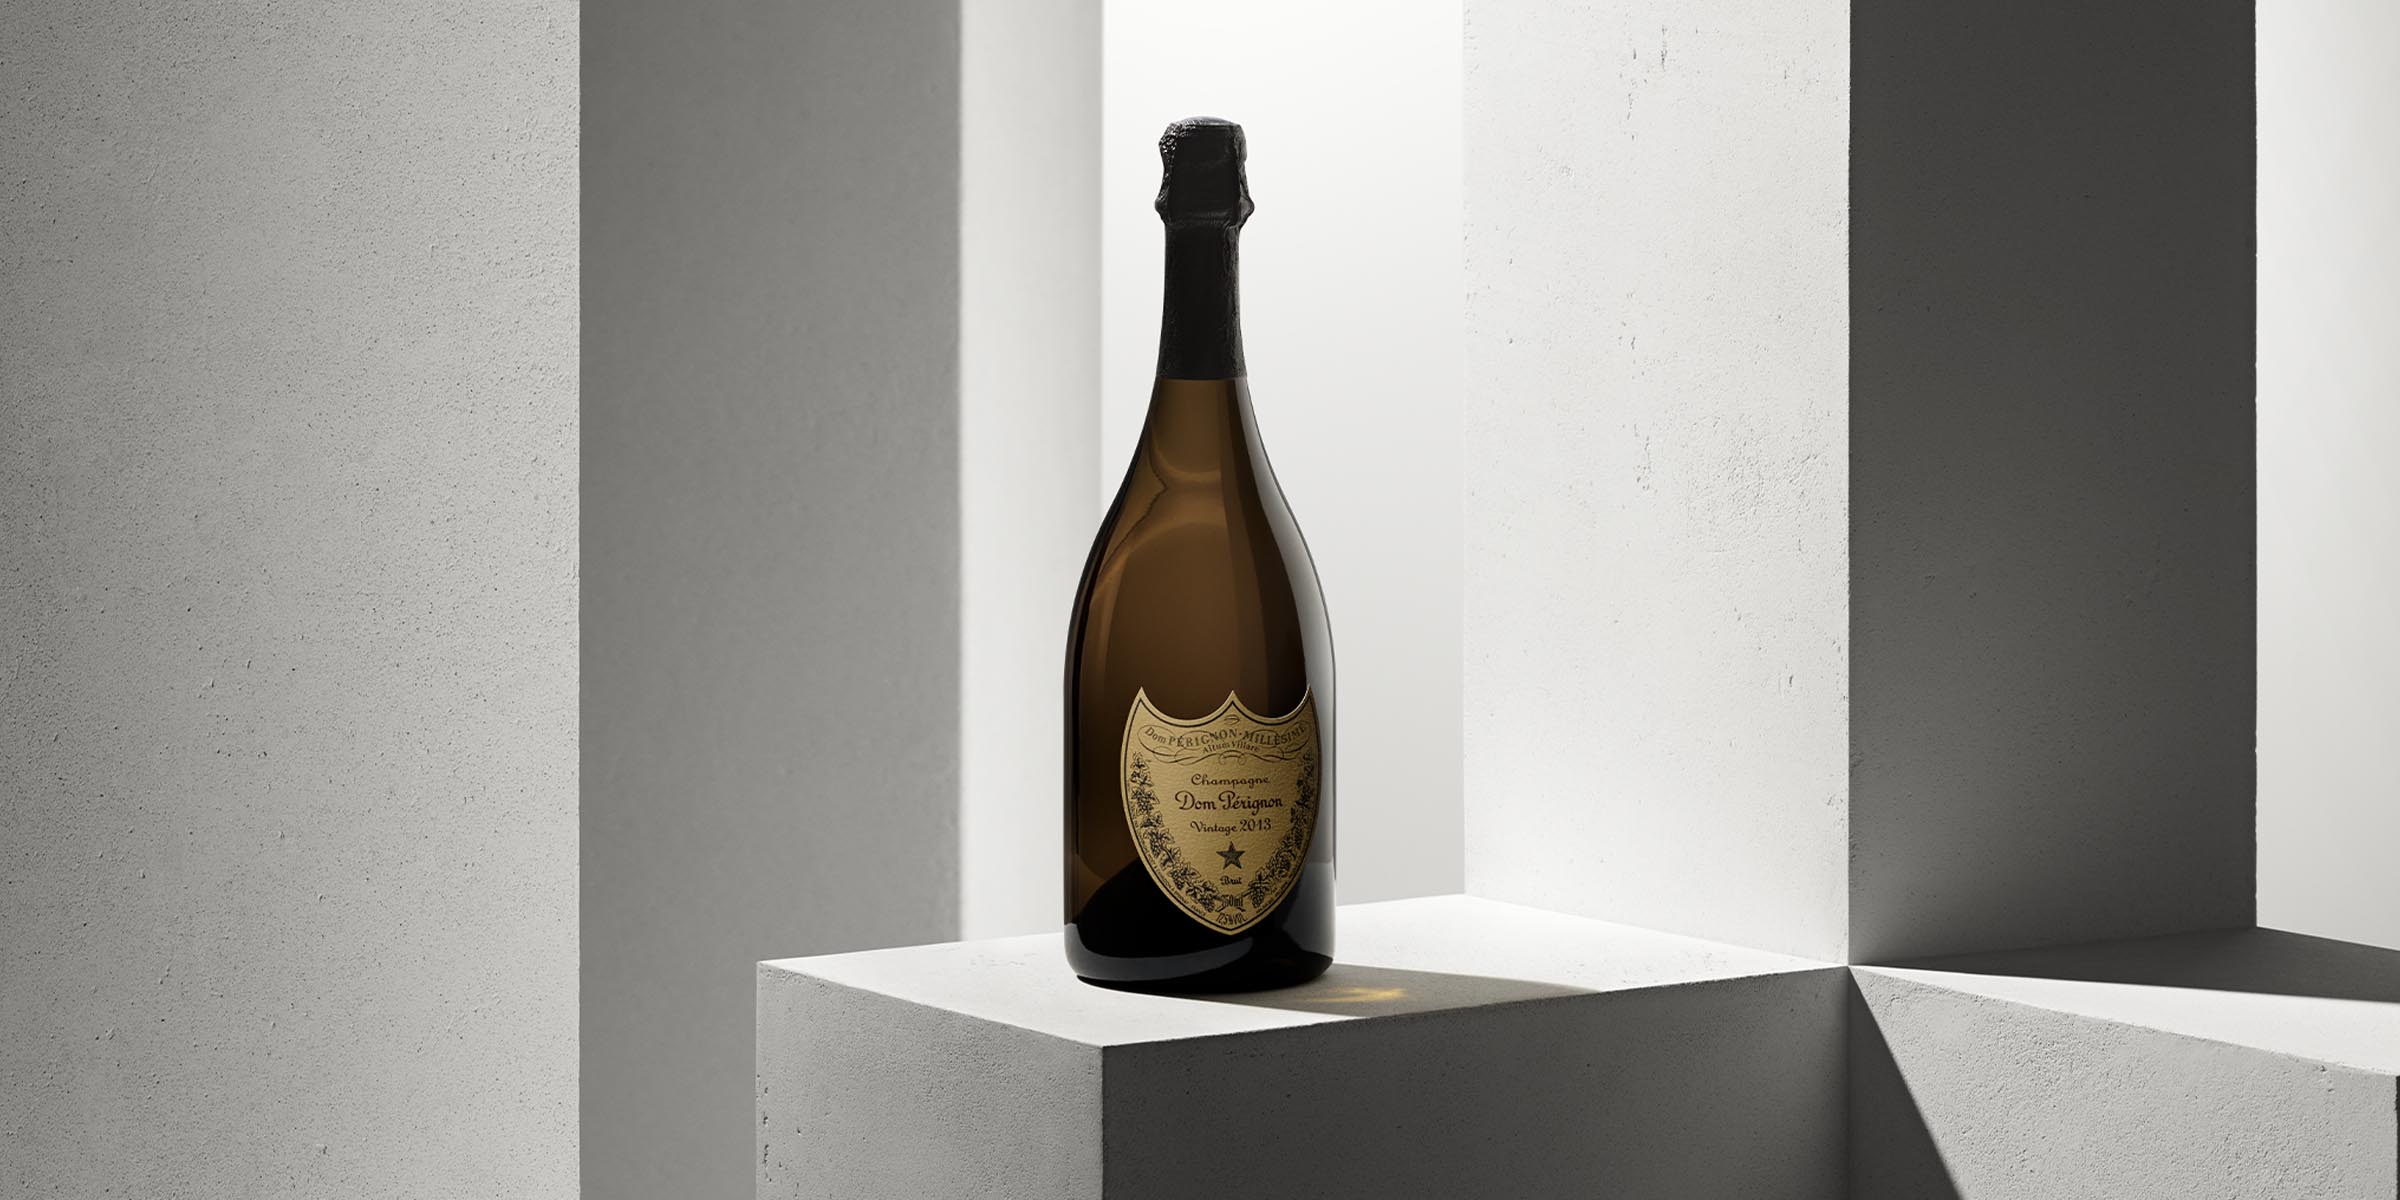 Dom Perignon Champagne Price: Assessing Luxury Champagne Costs